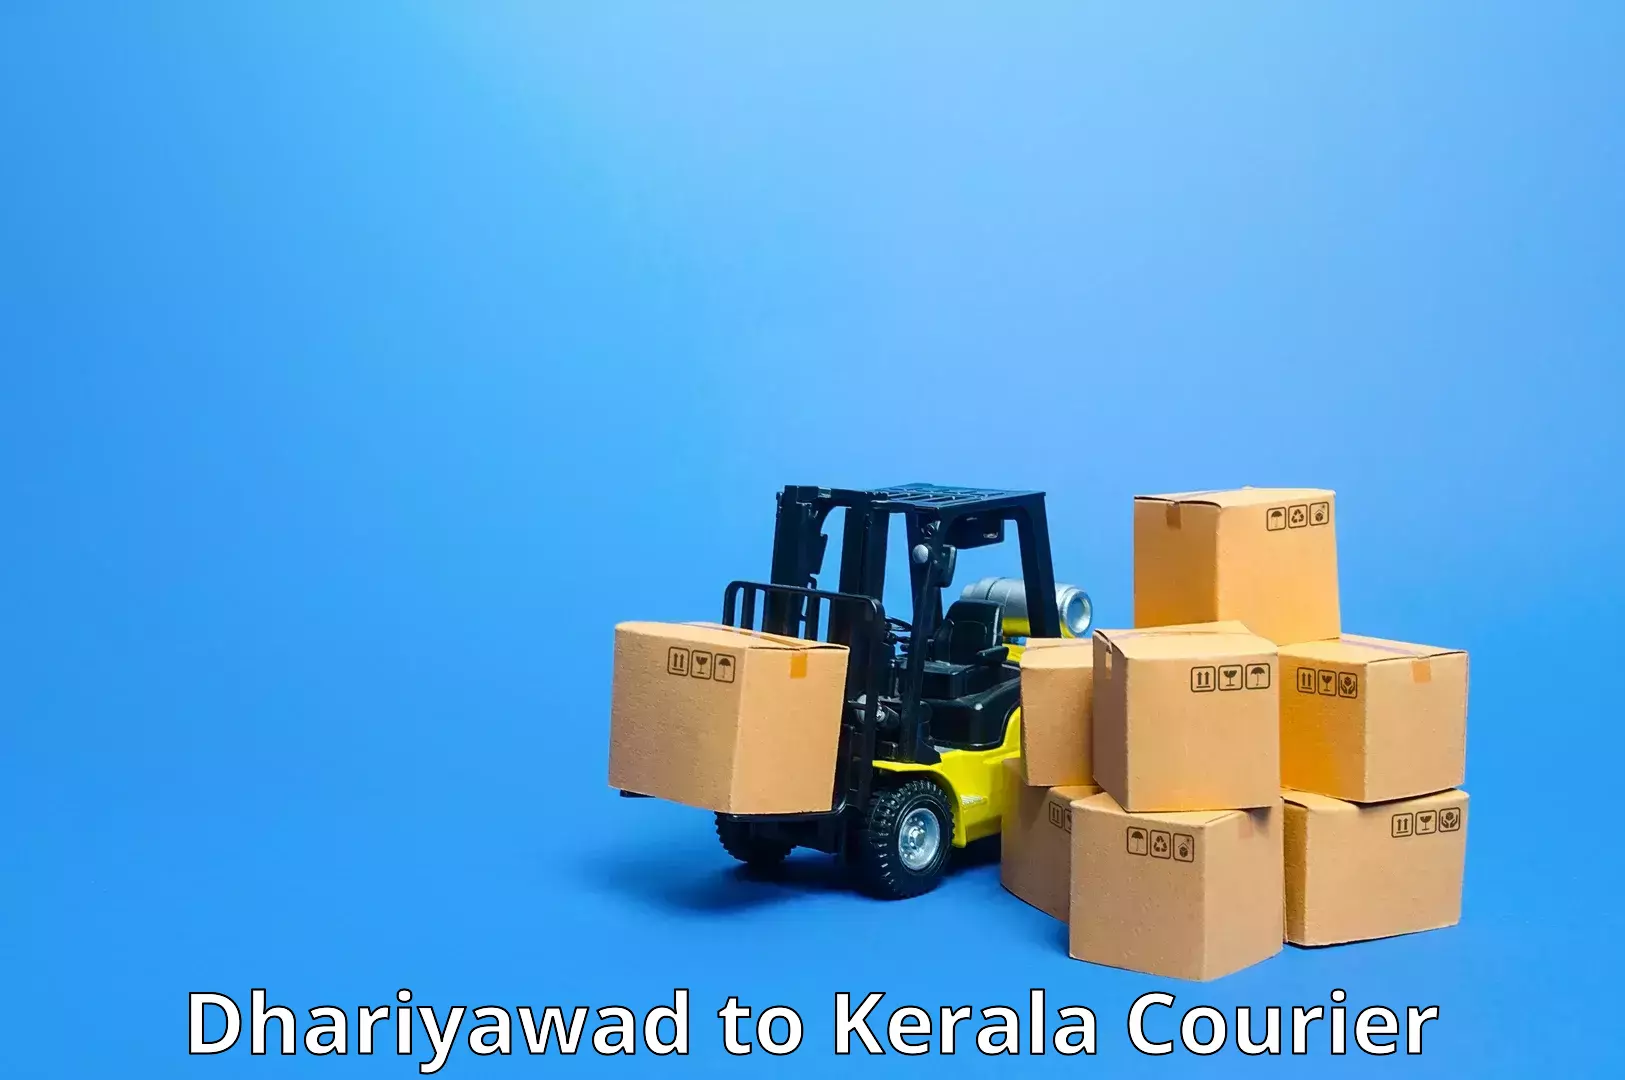 State-of-the-art courier technology Dhariyawad to Kerala